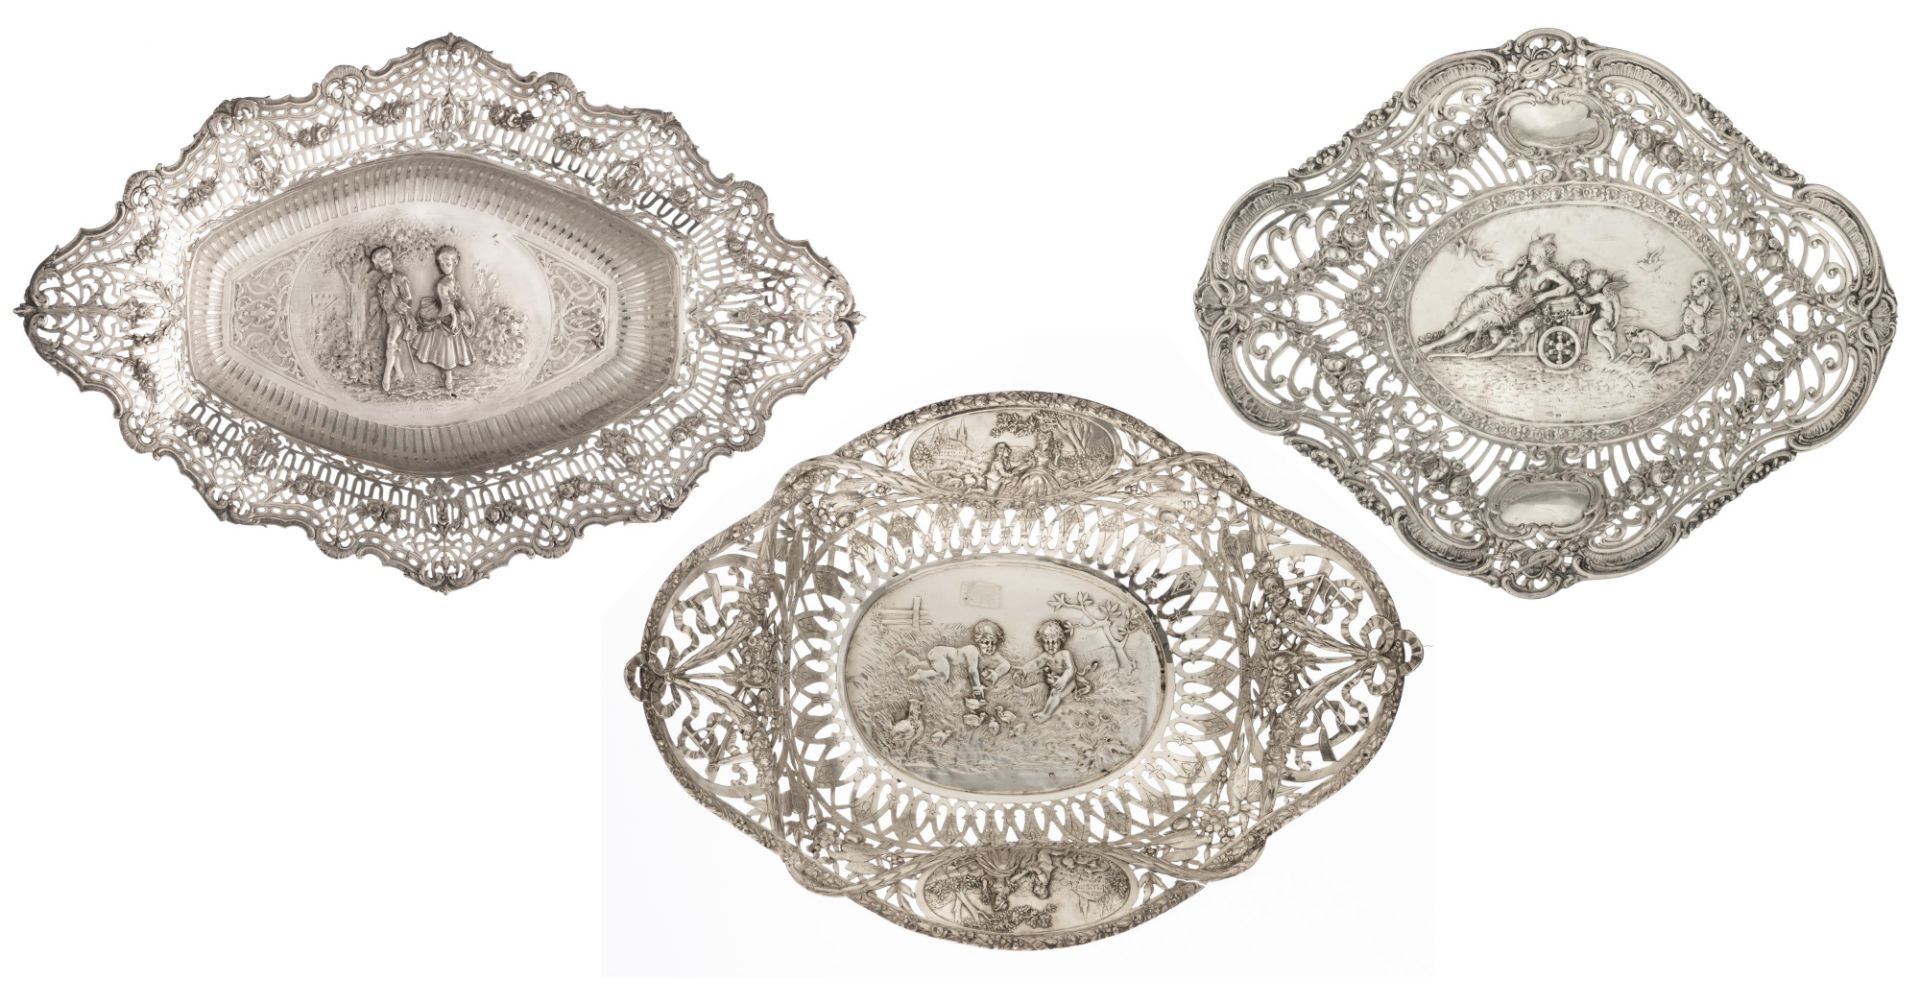 A collection of three silver chargers with ornate repousse pierced work, the well depicting playing